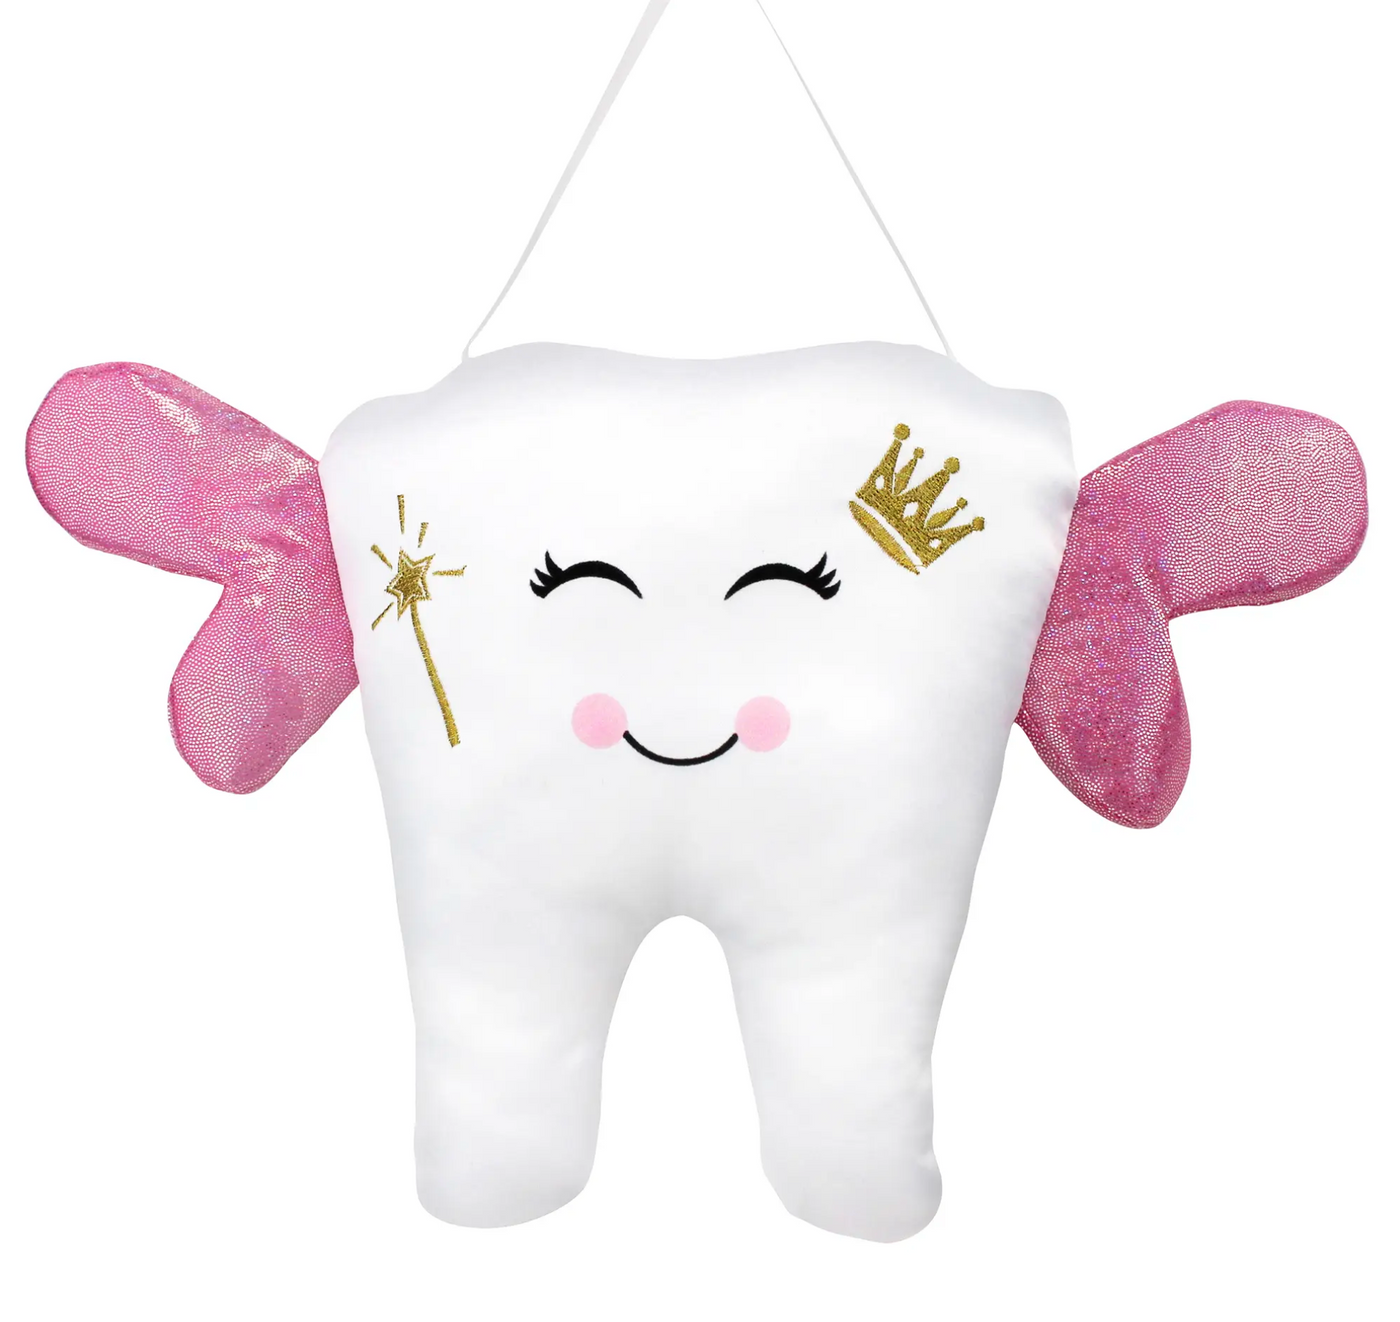 Winged Tooth Fairy Pillow